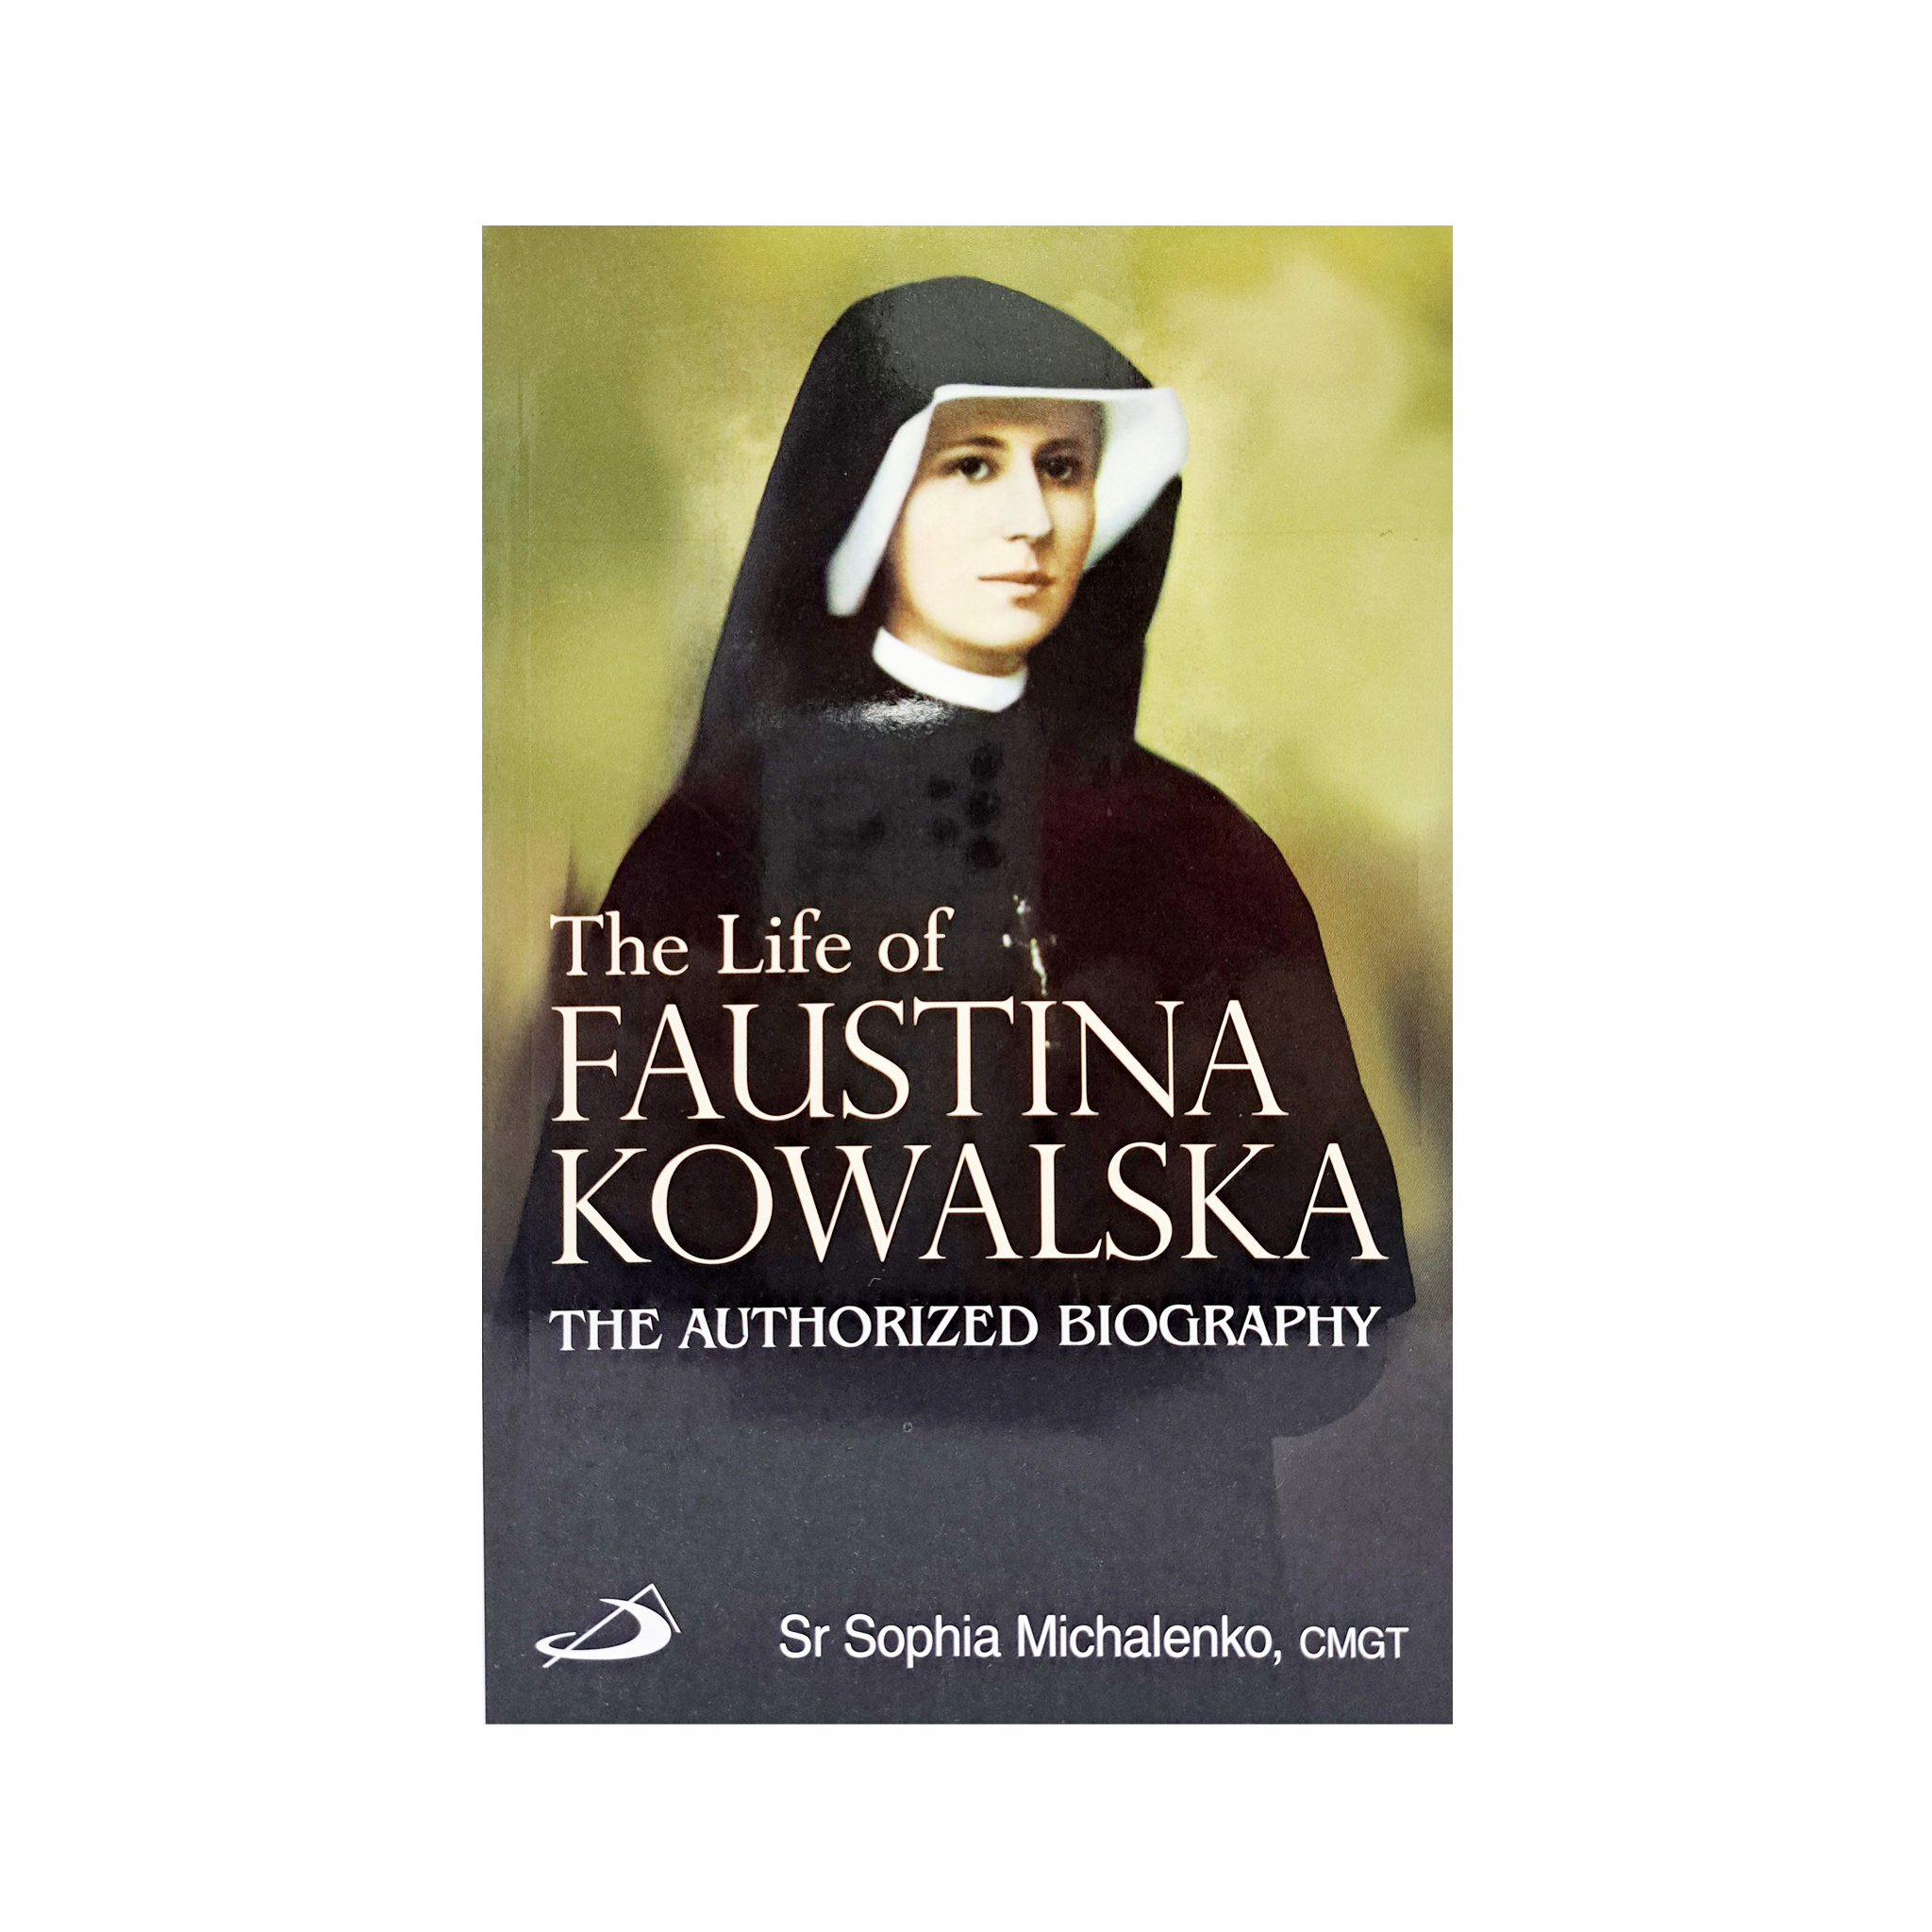 THE LIFE OF FAUSTINA KOWALSKA - THE AUTHORIZED BIOGRAPHY